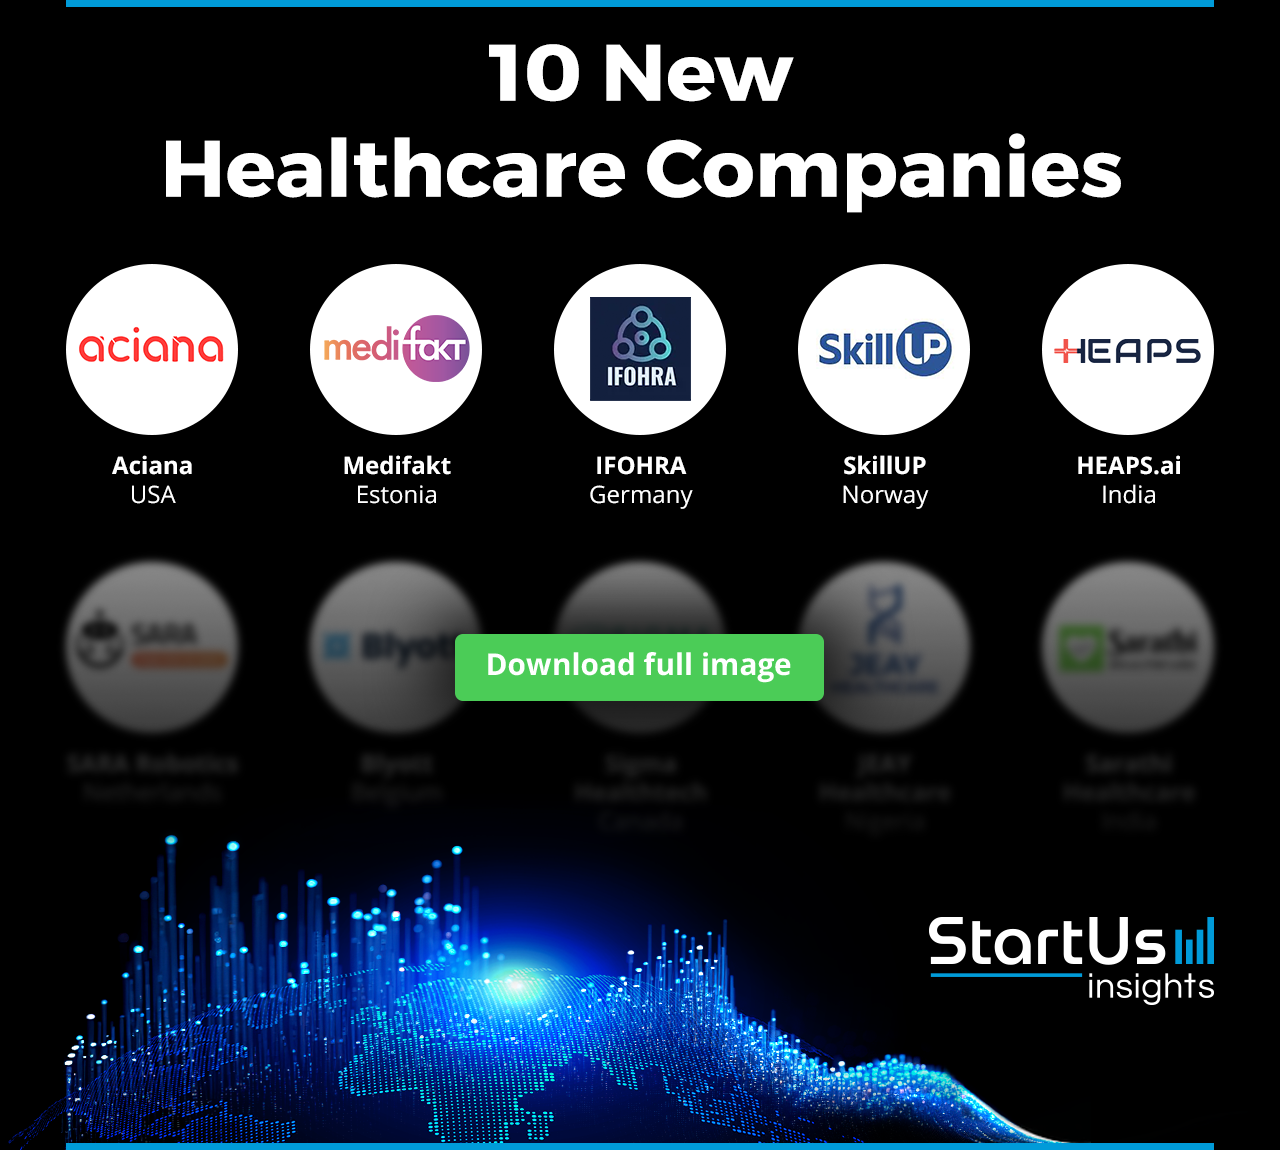 New-Healthcare-Companies-Logos-Blurred-StartUs-Insights-noresize